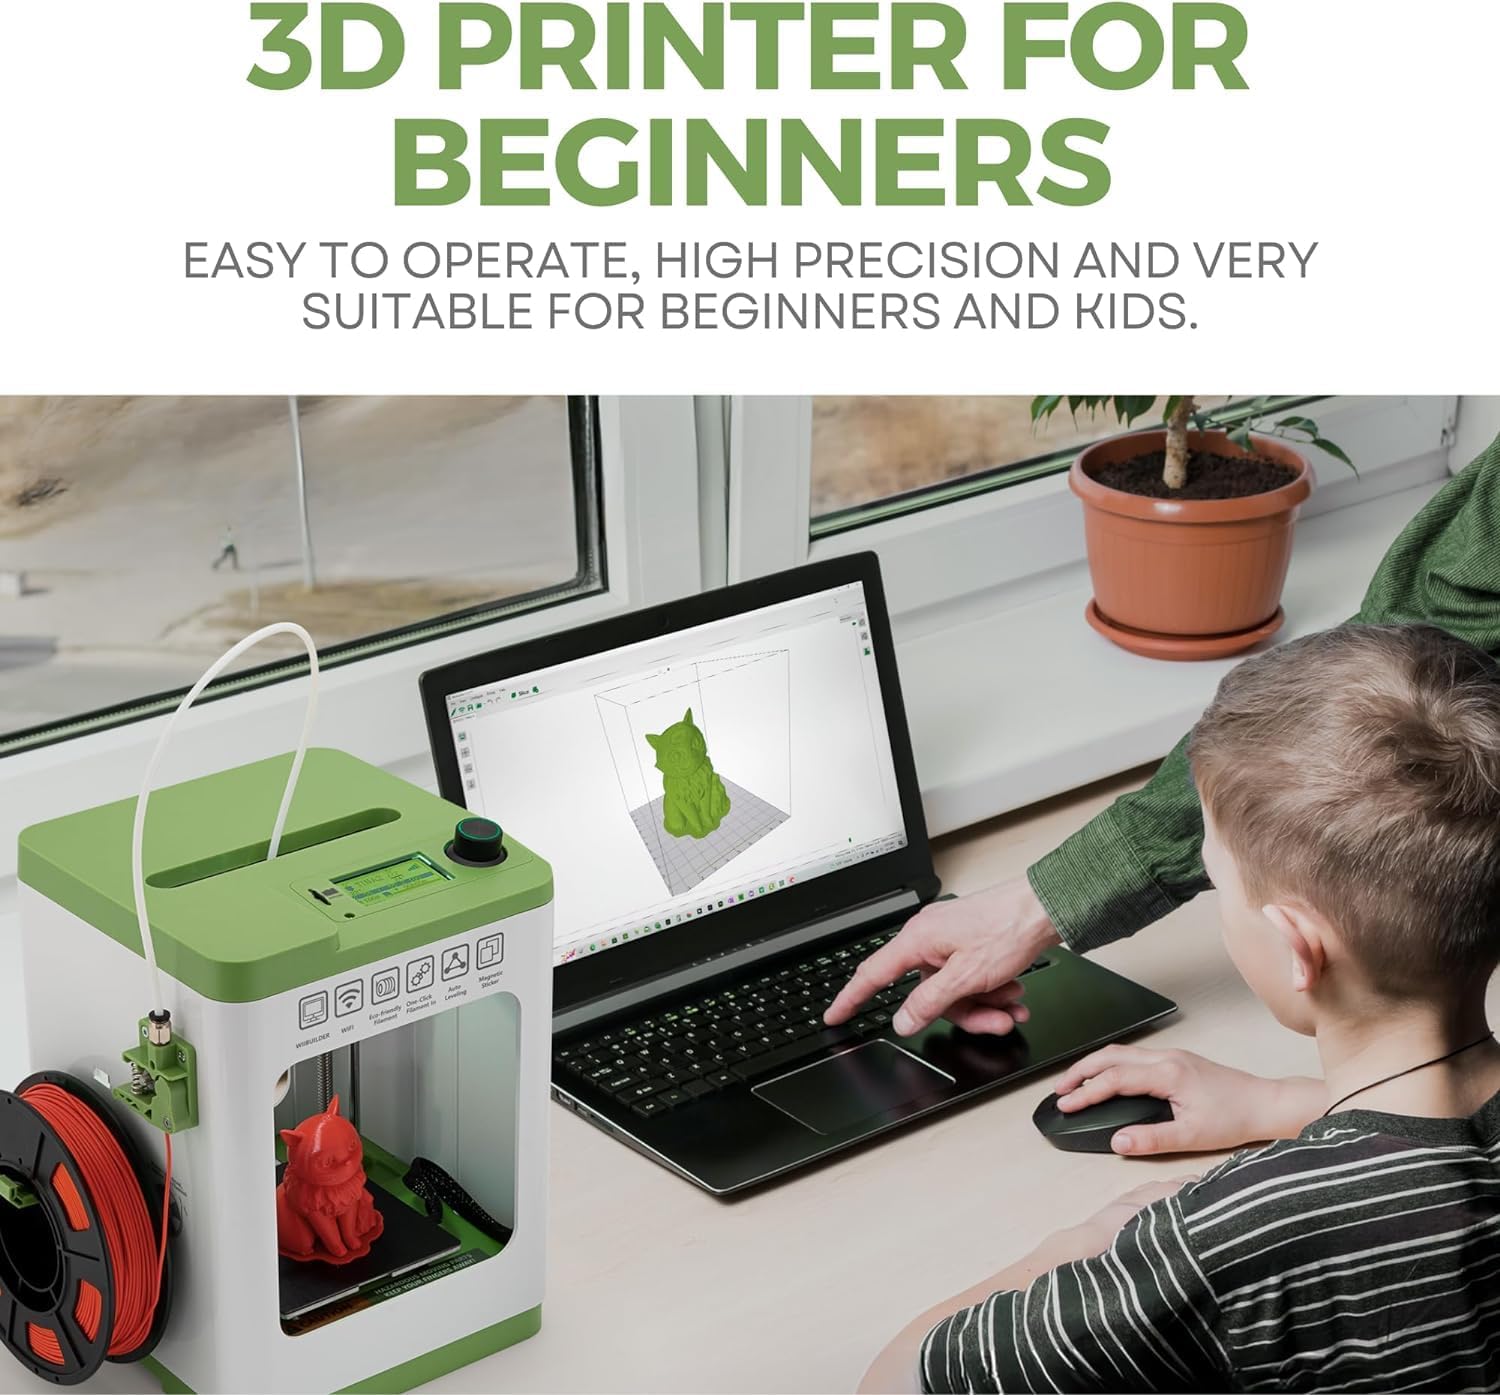 fully-assembled-mini-3d-printer-for-kids-and-beginners-complete-starter-kit-with-auto-leveling-3d-printing-machine-10m-p-2 Fully Assembled Mini 3D Printer for Kids and Beginners Review